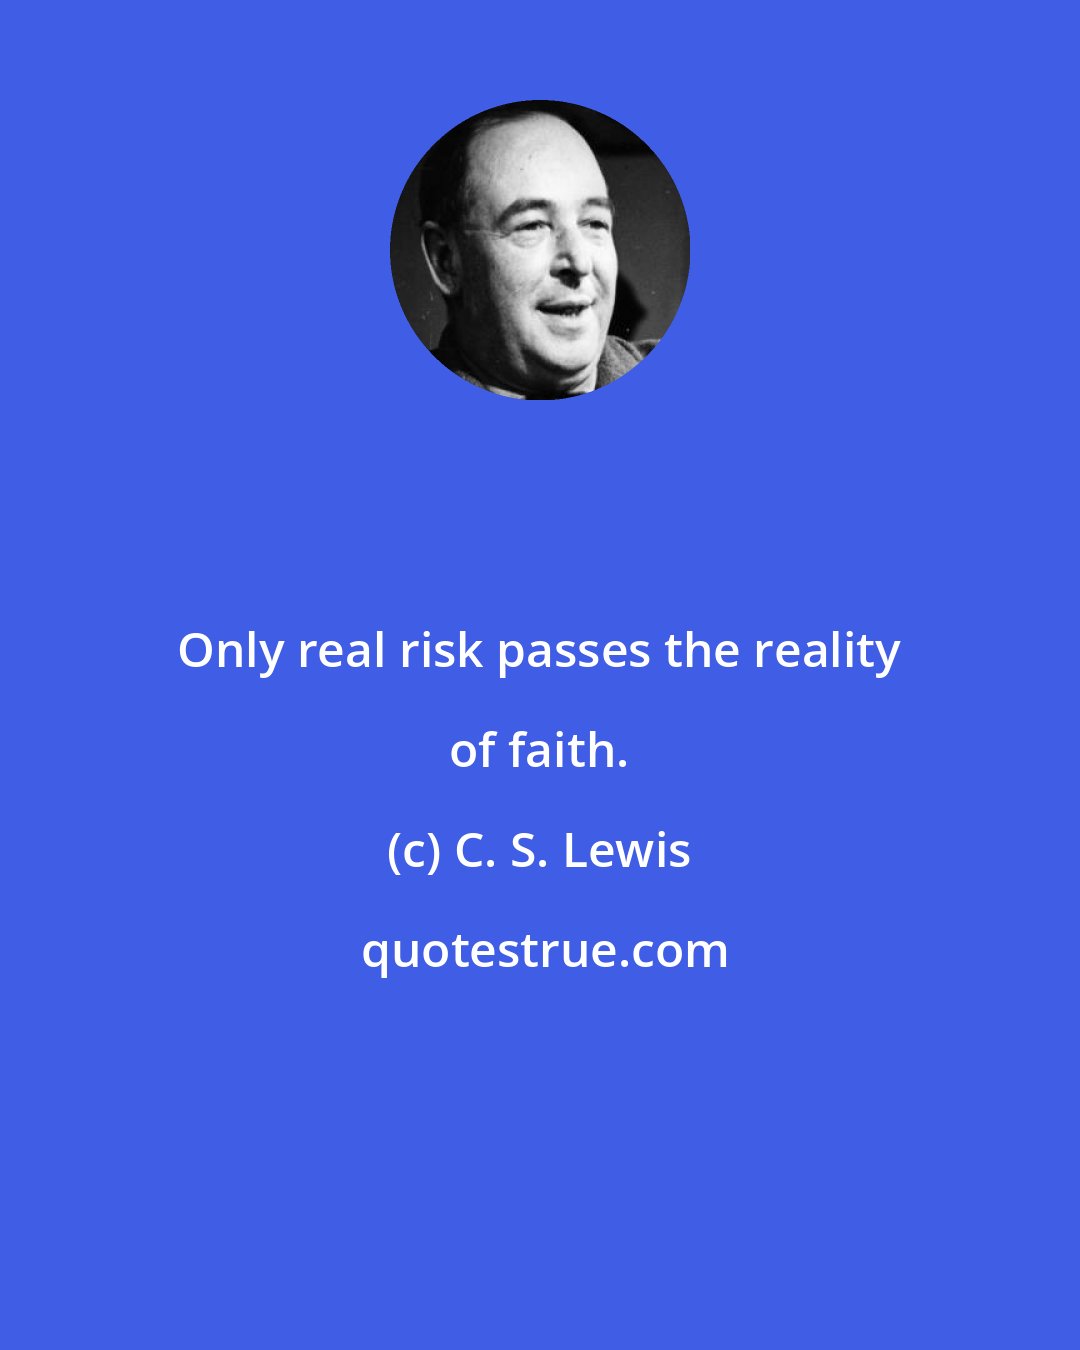 C. S. Lewis: Only real risk passes the reality of faith.